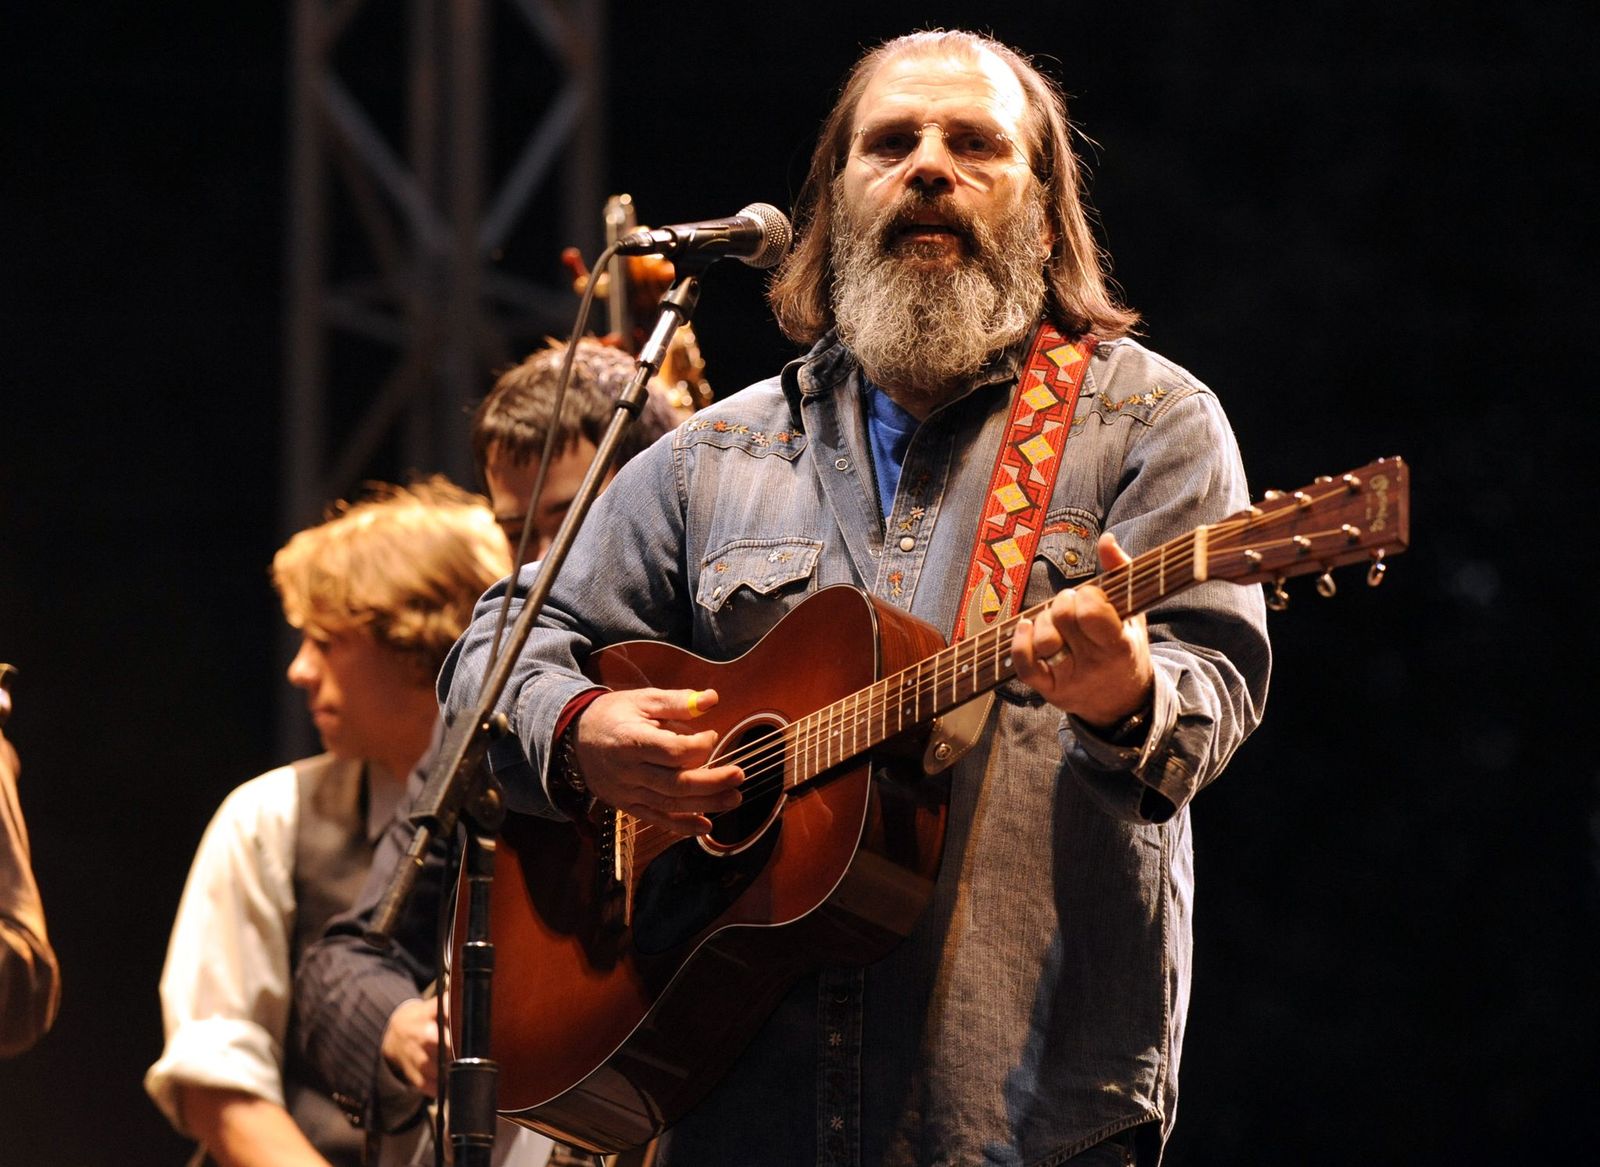 Steve Earle performs with T Bone Burnett and Friends as part of Hardly Strictly Bluegrass 10 on October 1, 2010, in San Francisco, California | Photo: Tim Mosenfelder/Getty Images